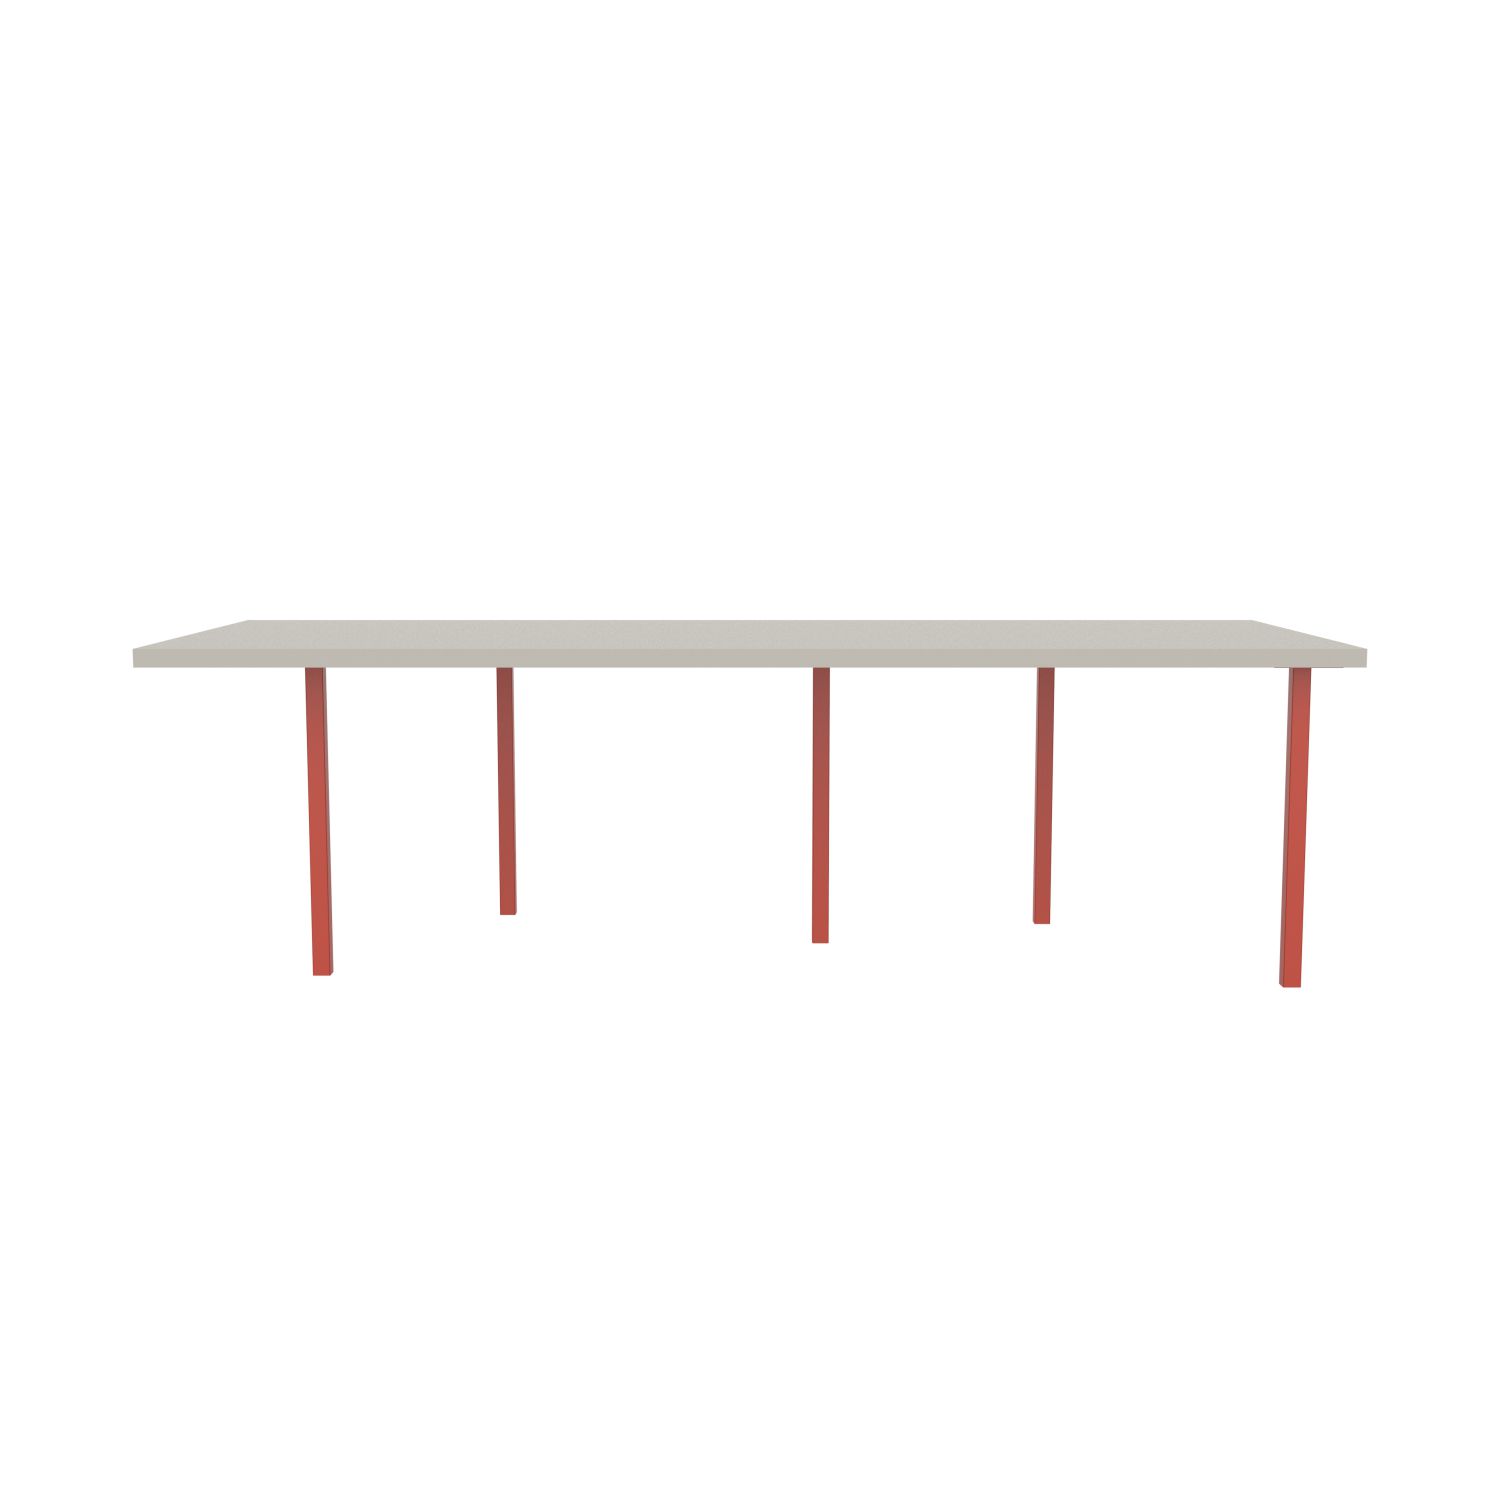 lensvelt bbrand table five fixed heigt 103x264 hpl white 50 mm price level 1 vermilion red ral2002